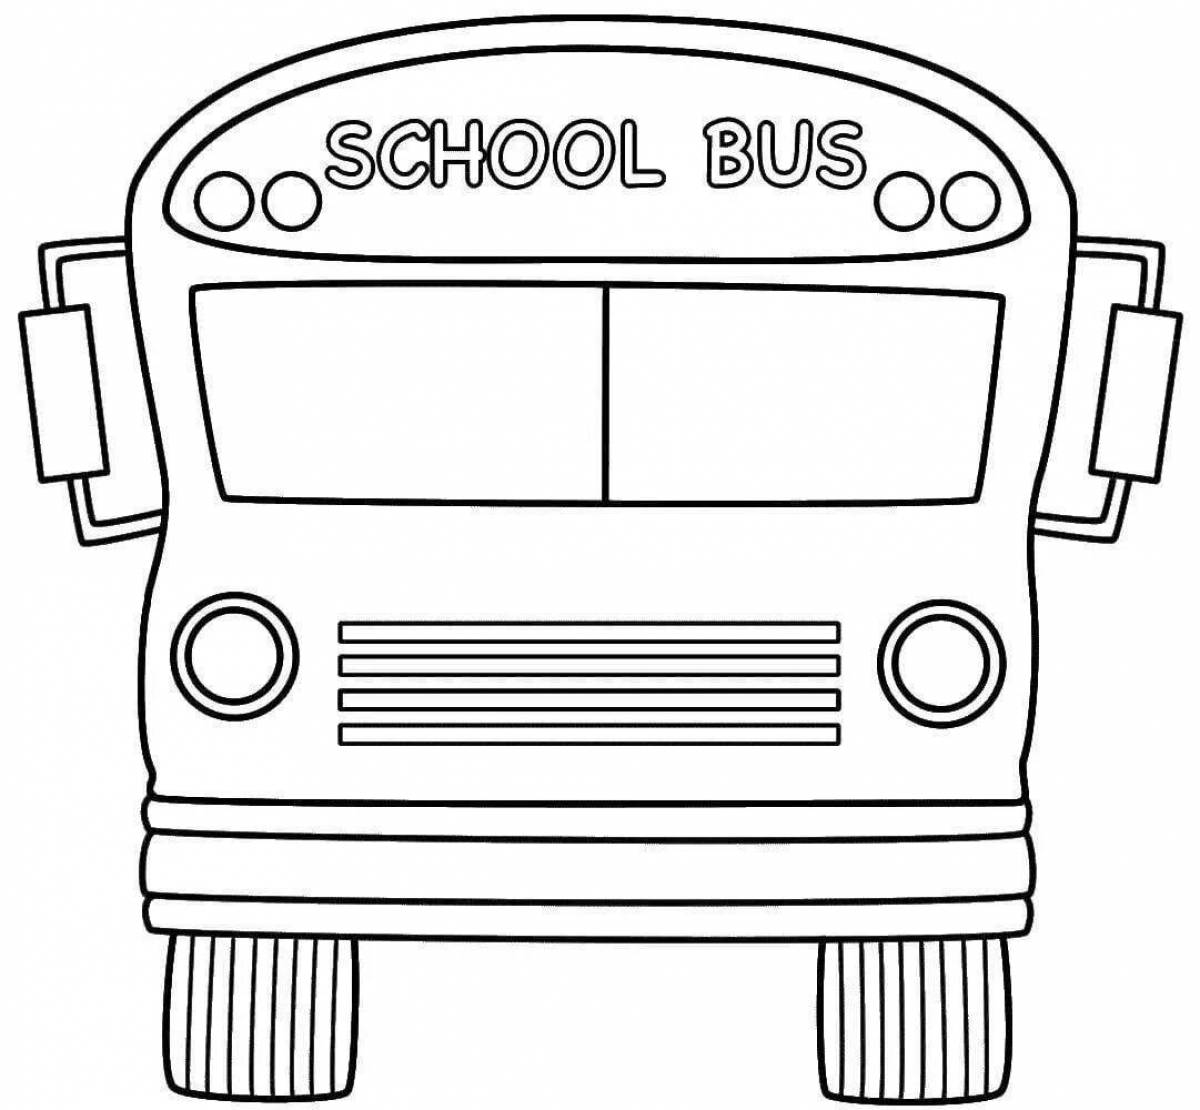 English bus coloring page